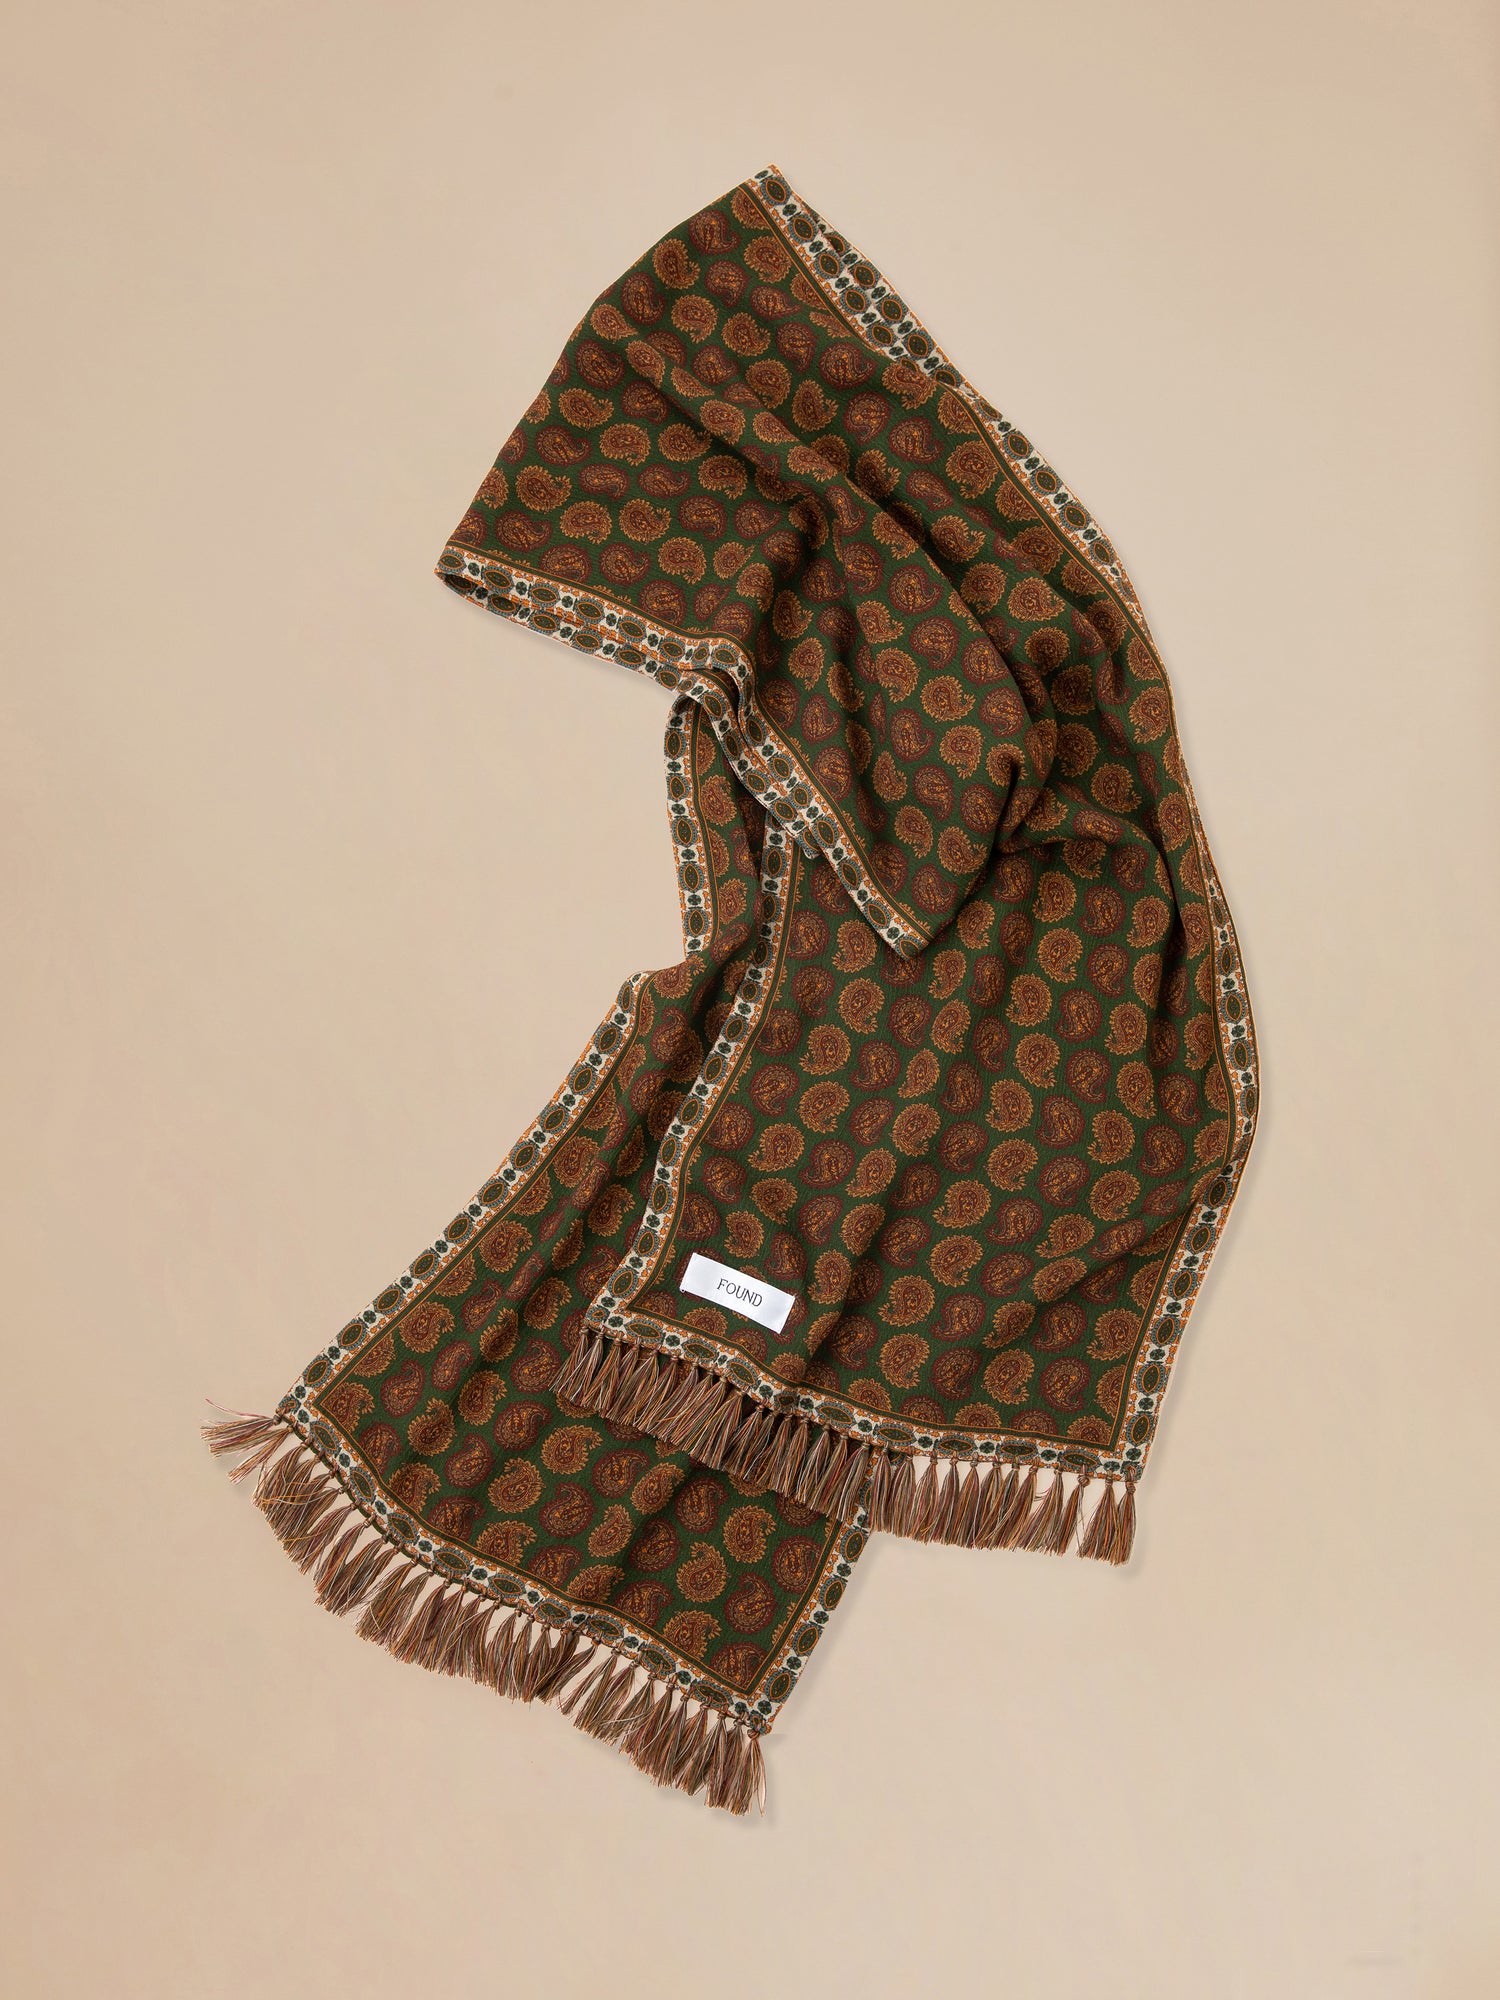 A hand-tied Paisley Forest Scarf with a paisley pattern by Found.